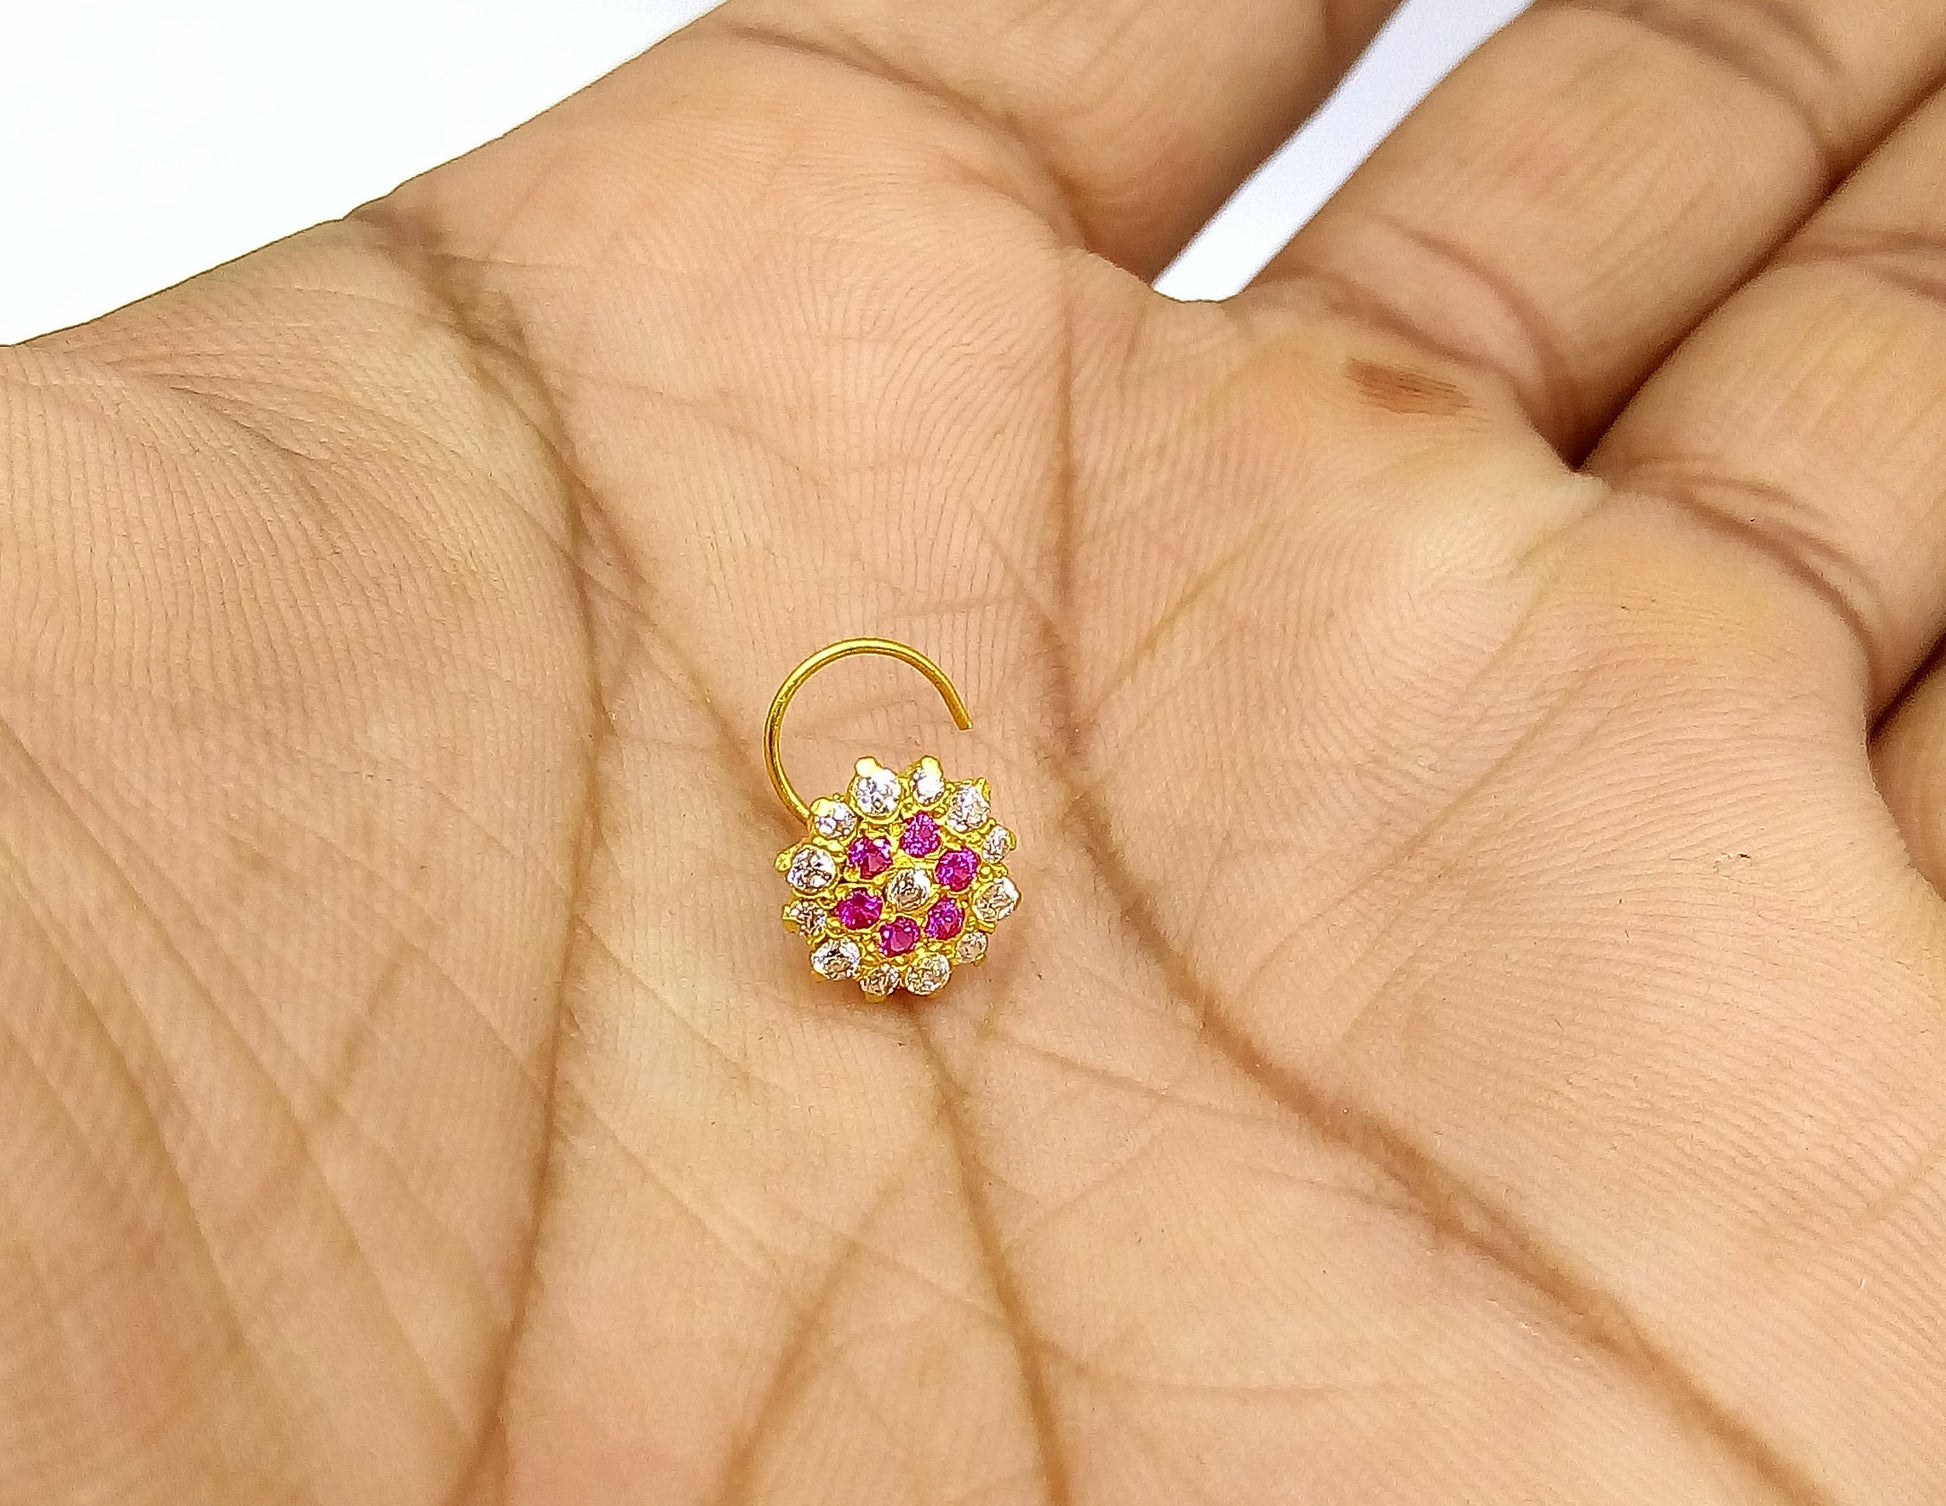 18k yellow gold handmade fabulous cubic zircon stone nose pin excellent antique vintage design tribal jewelry - TRIBAL ORNAMENTS